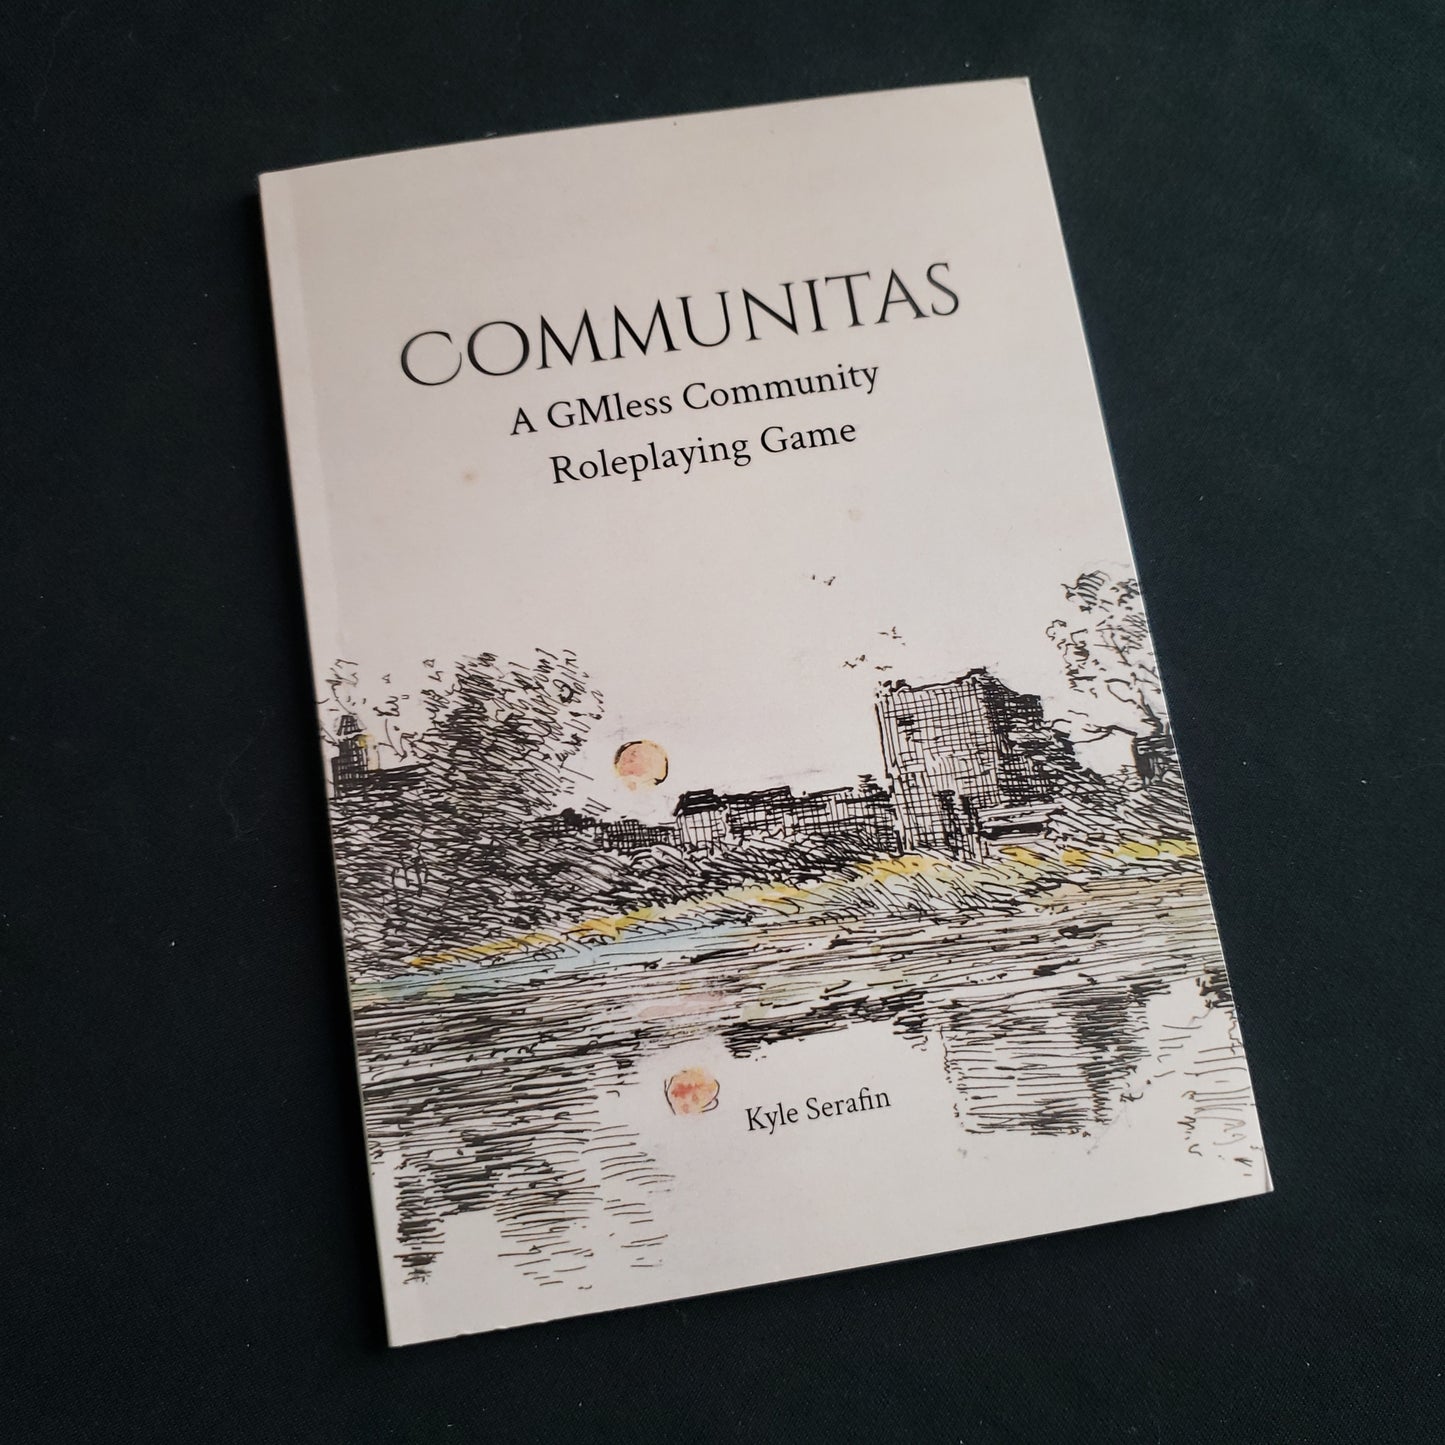 Image shows the front cover of the Communitas roleplaying game book